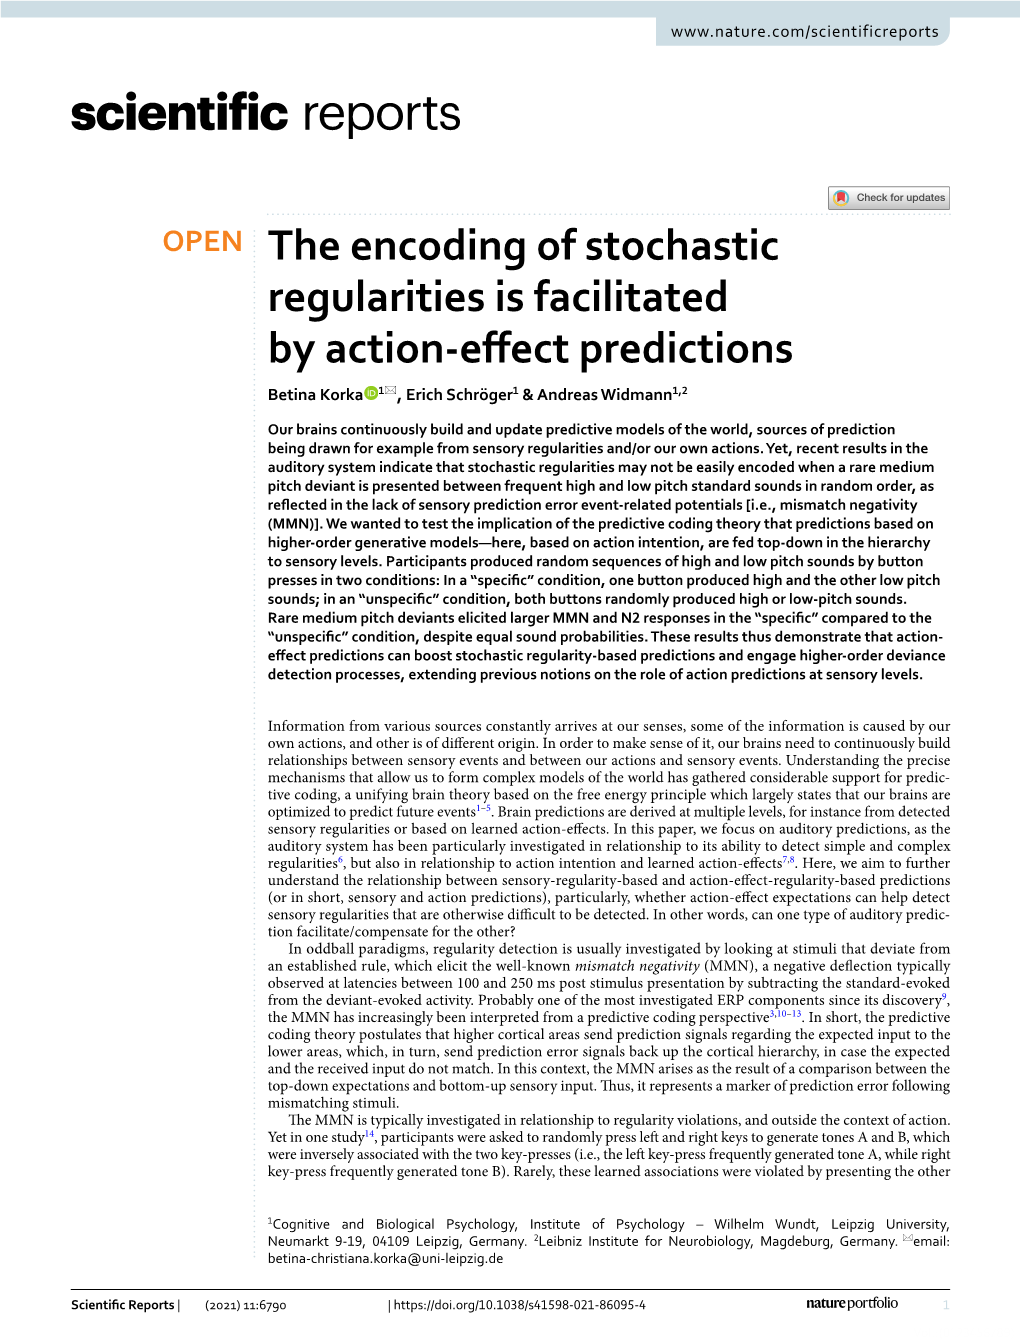 The Encoding of Stochastic Regularities Is Facilitated by Action-Effect